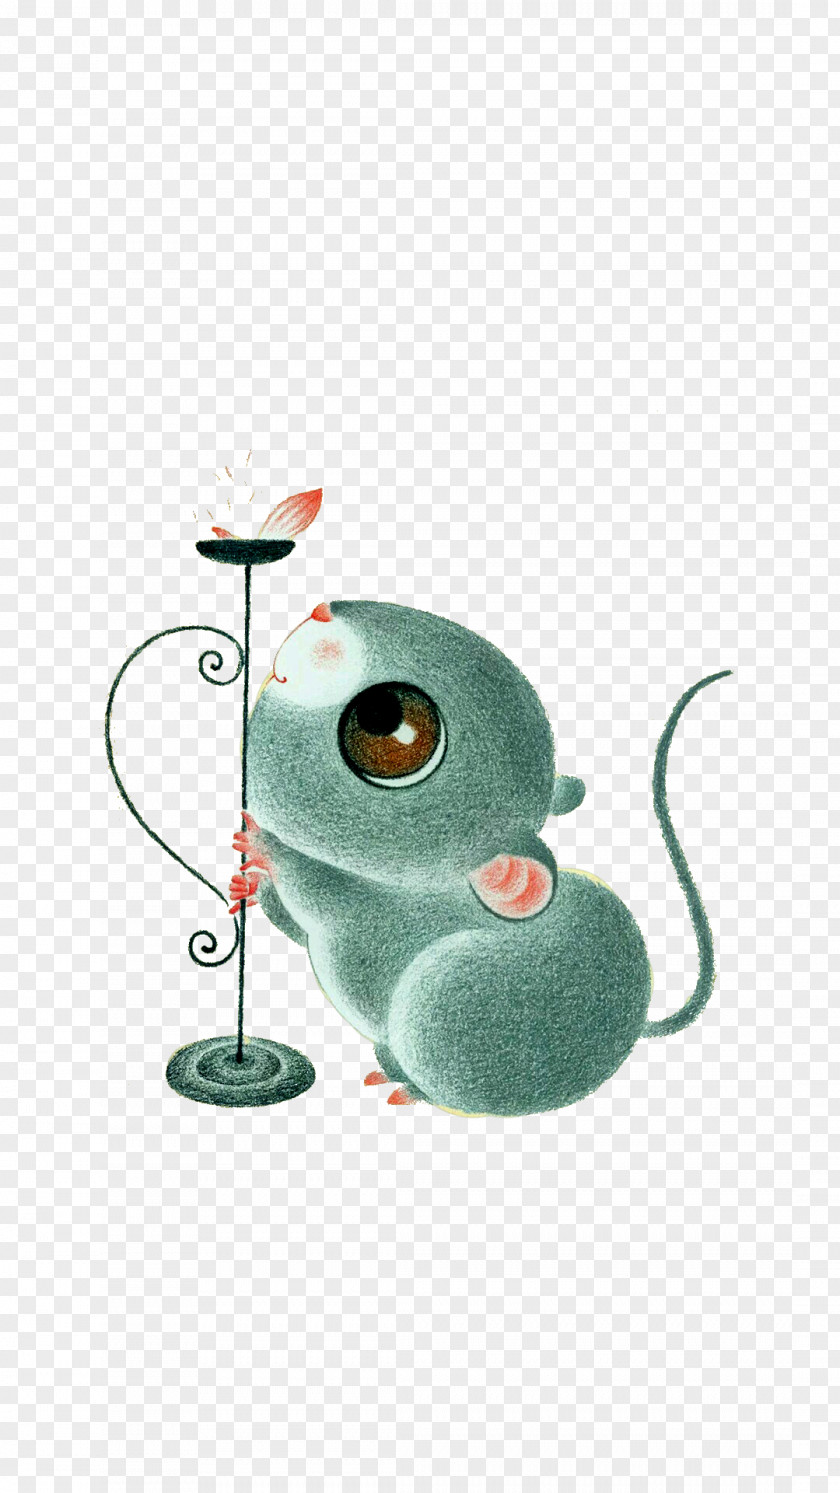 Cute Mouse Chinese Zodiac I Ching Rat Month Fortune-telling PNG